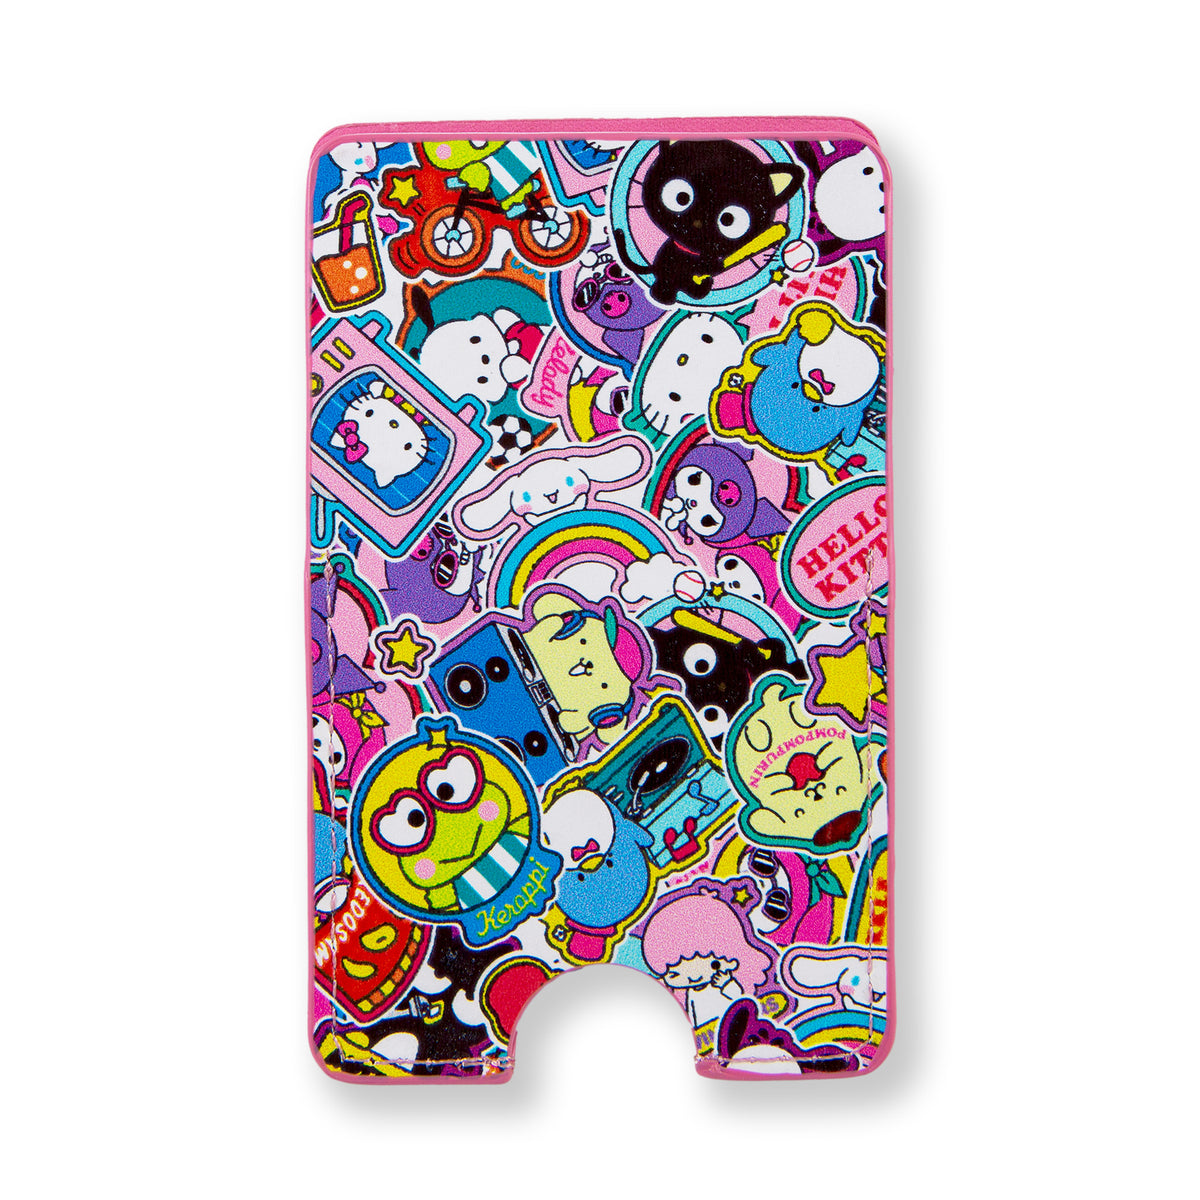 Hello Kitty and Friends x Sonix Stickers Magnetic Wallet Accessory BySonix Inc.   